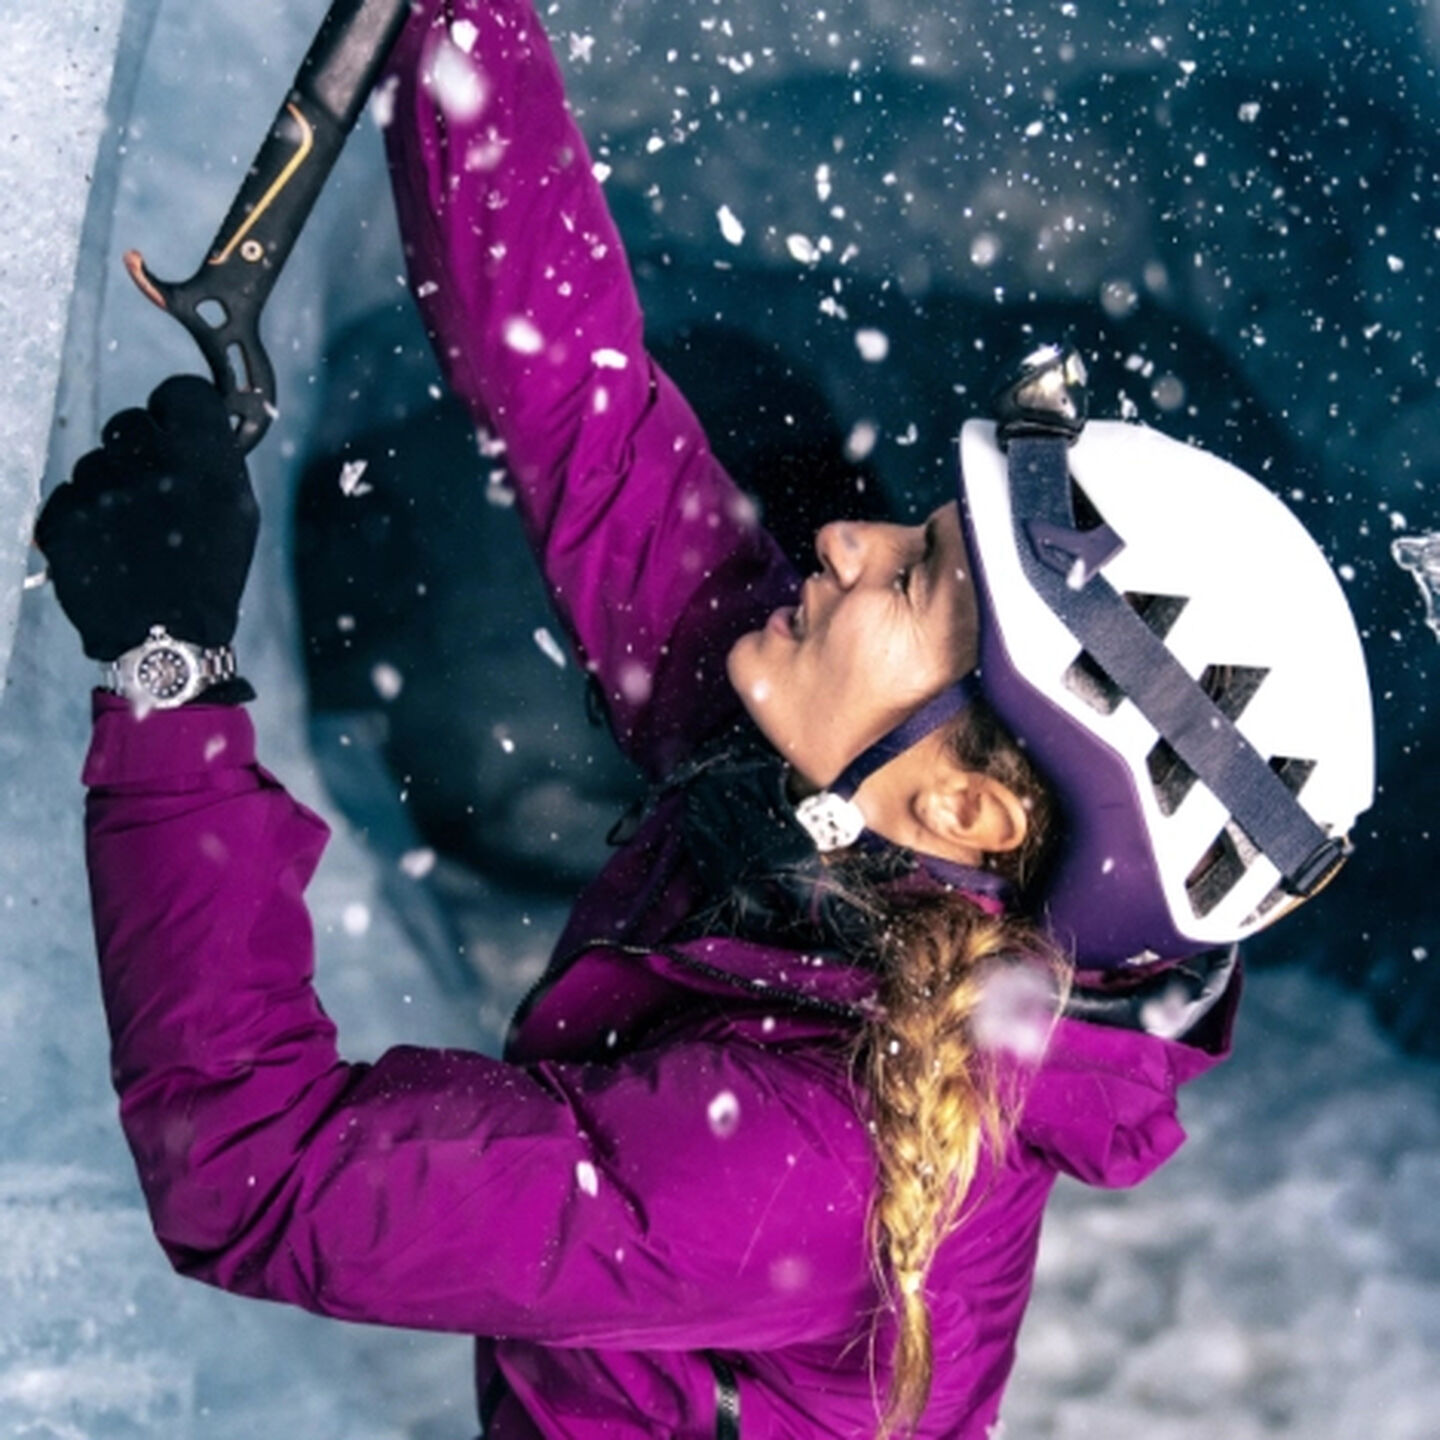 A woman ice climbing in a purple jacket and white helmet